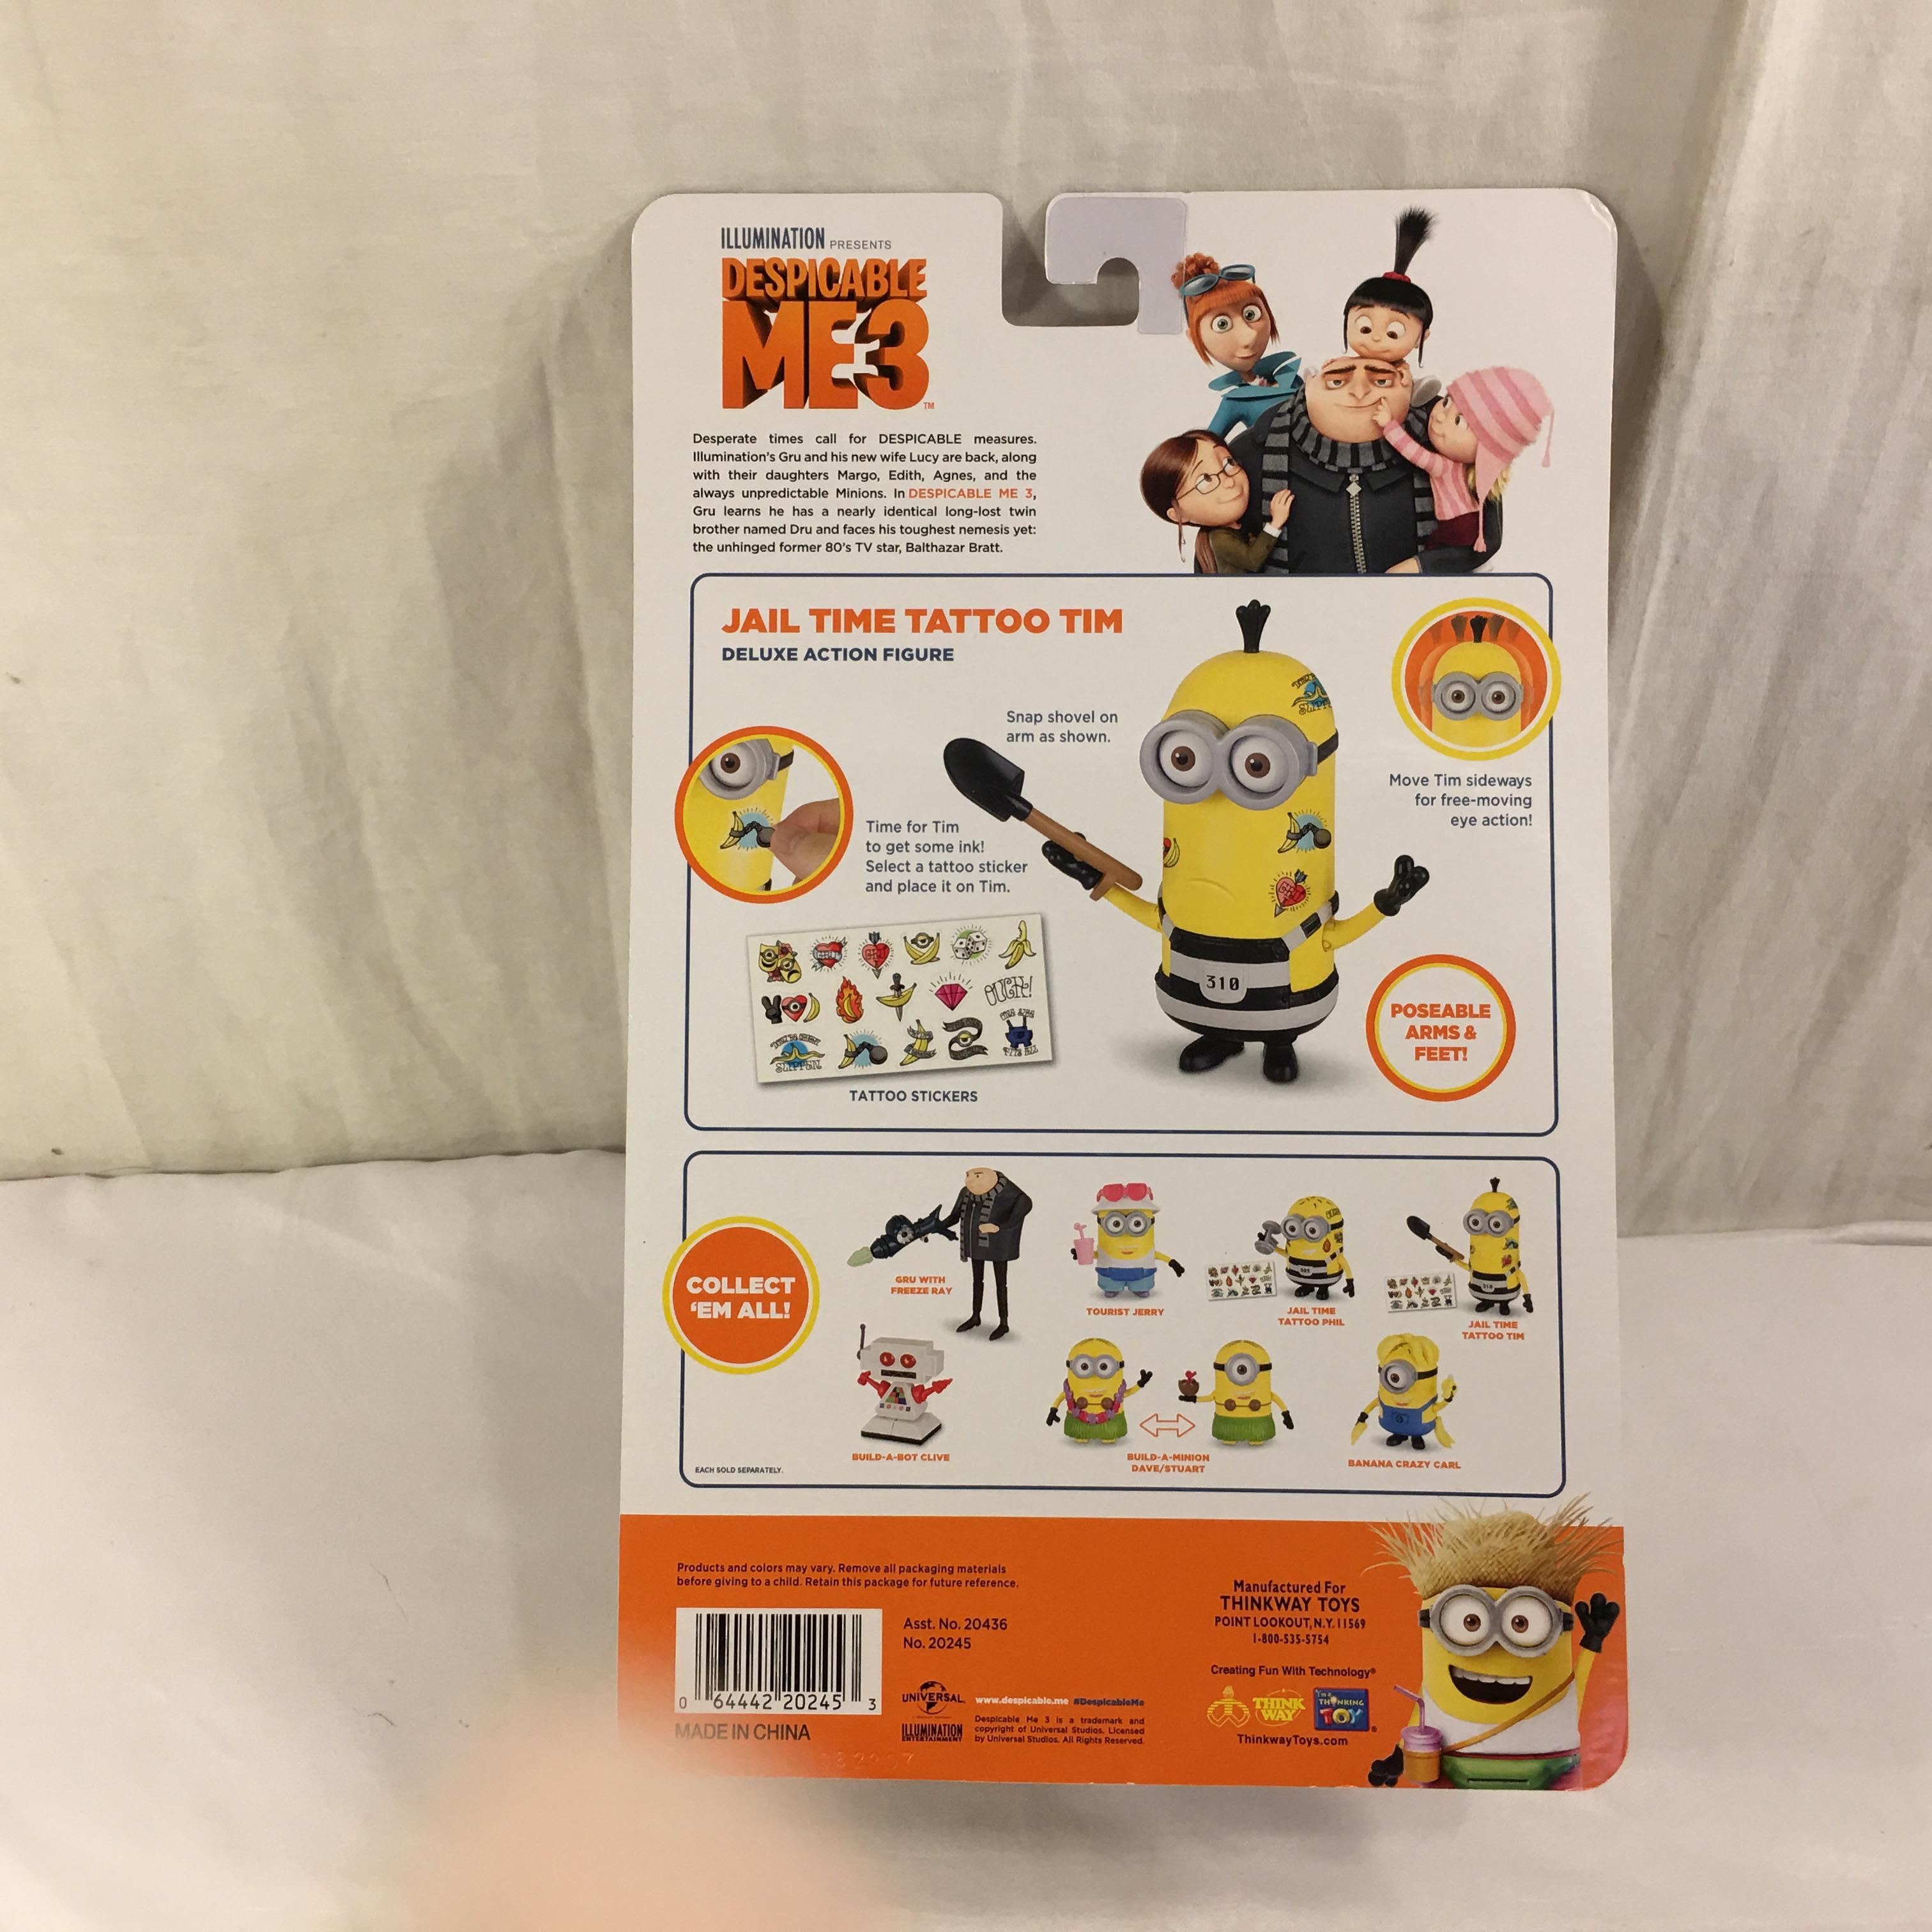 NIB Illumination Ent. Minions Deluxe Action Figure Despecable Me 3 Jail Time Tattoo Tim 6-7"